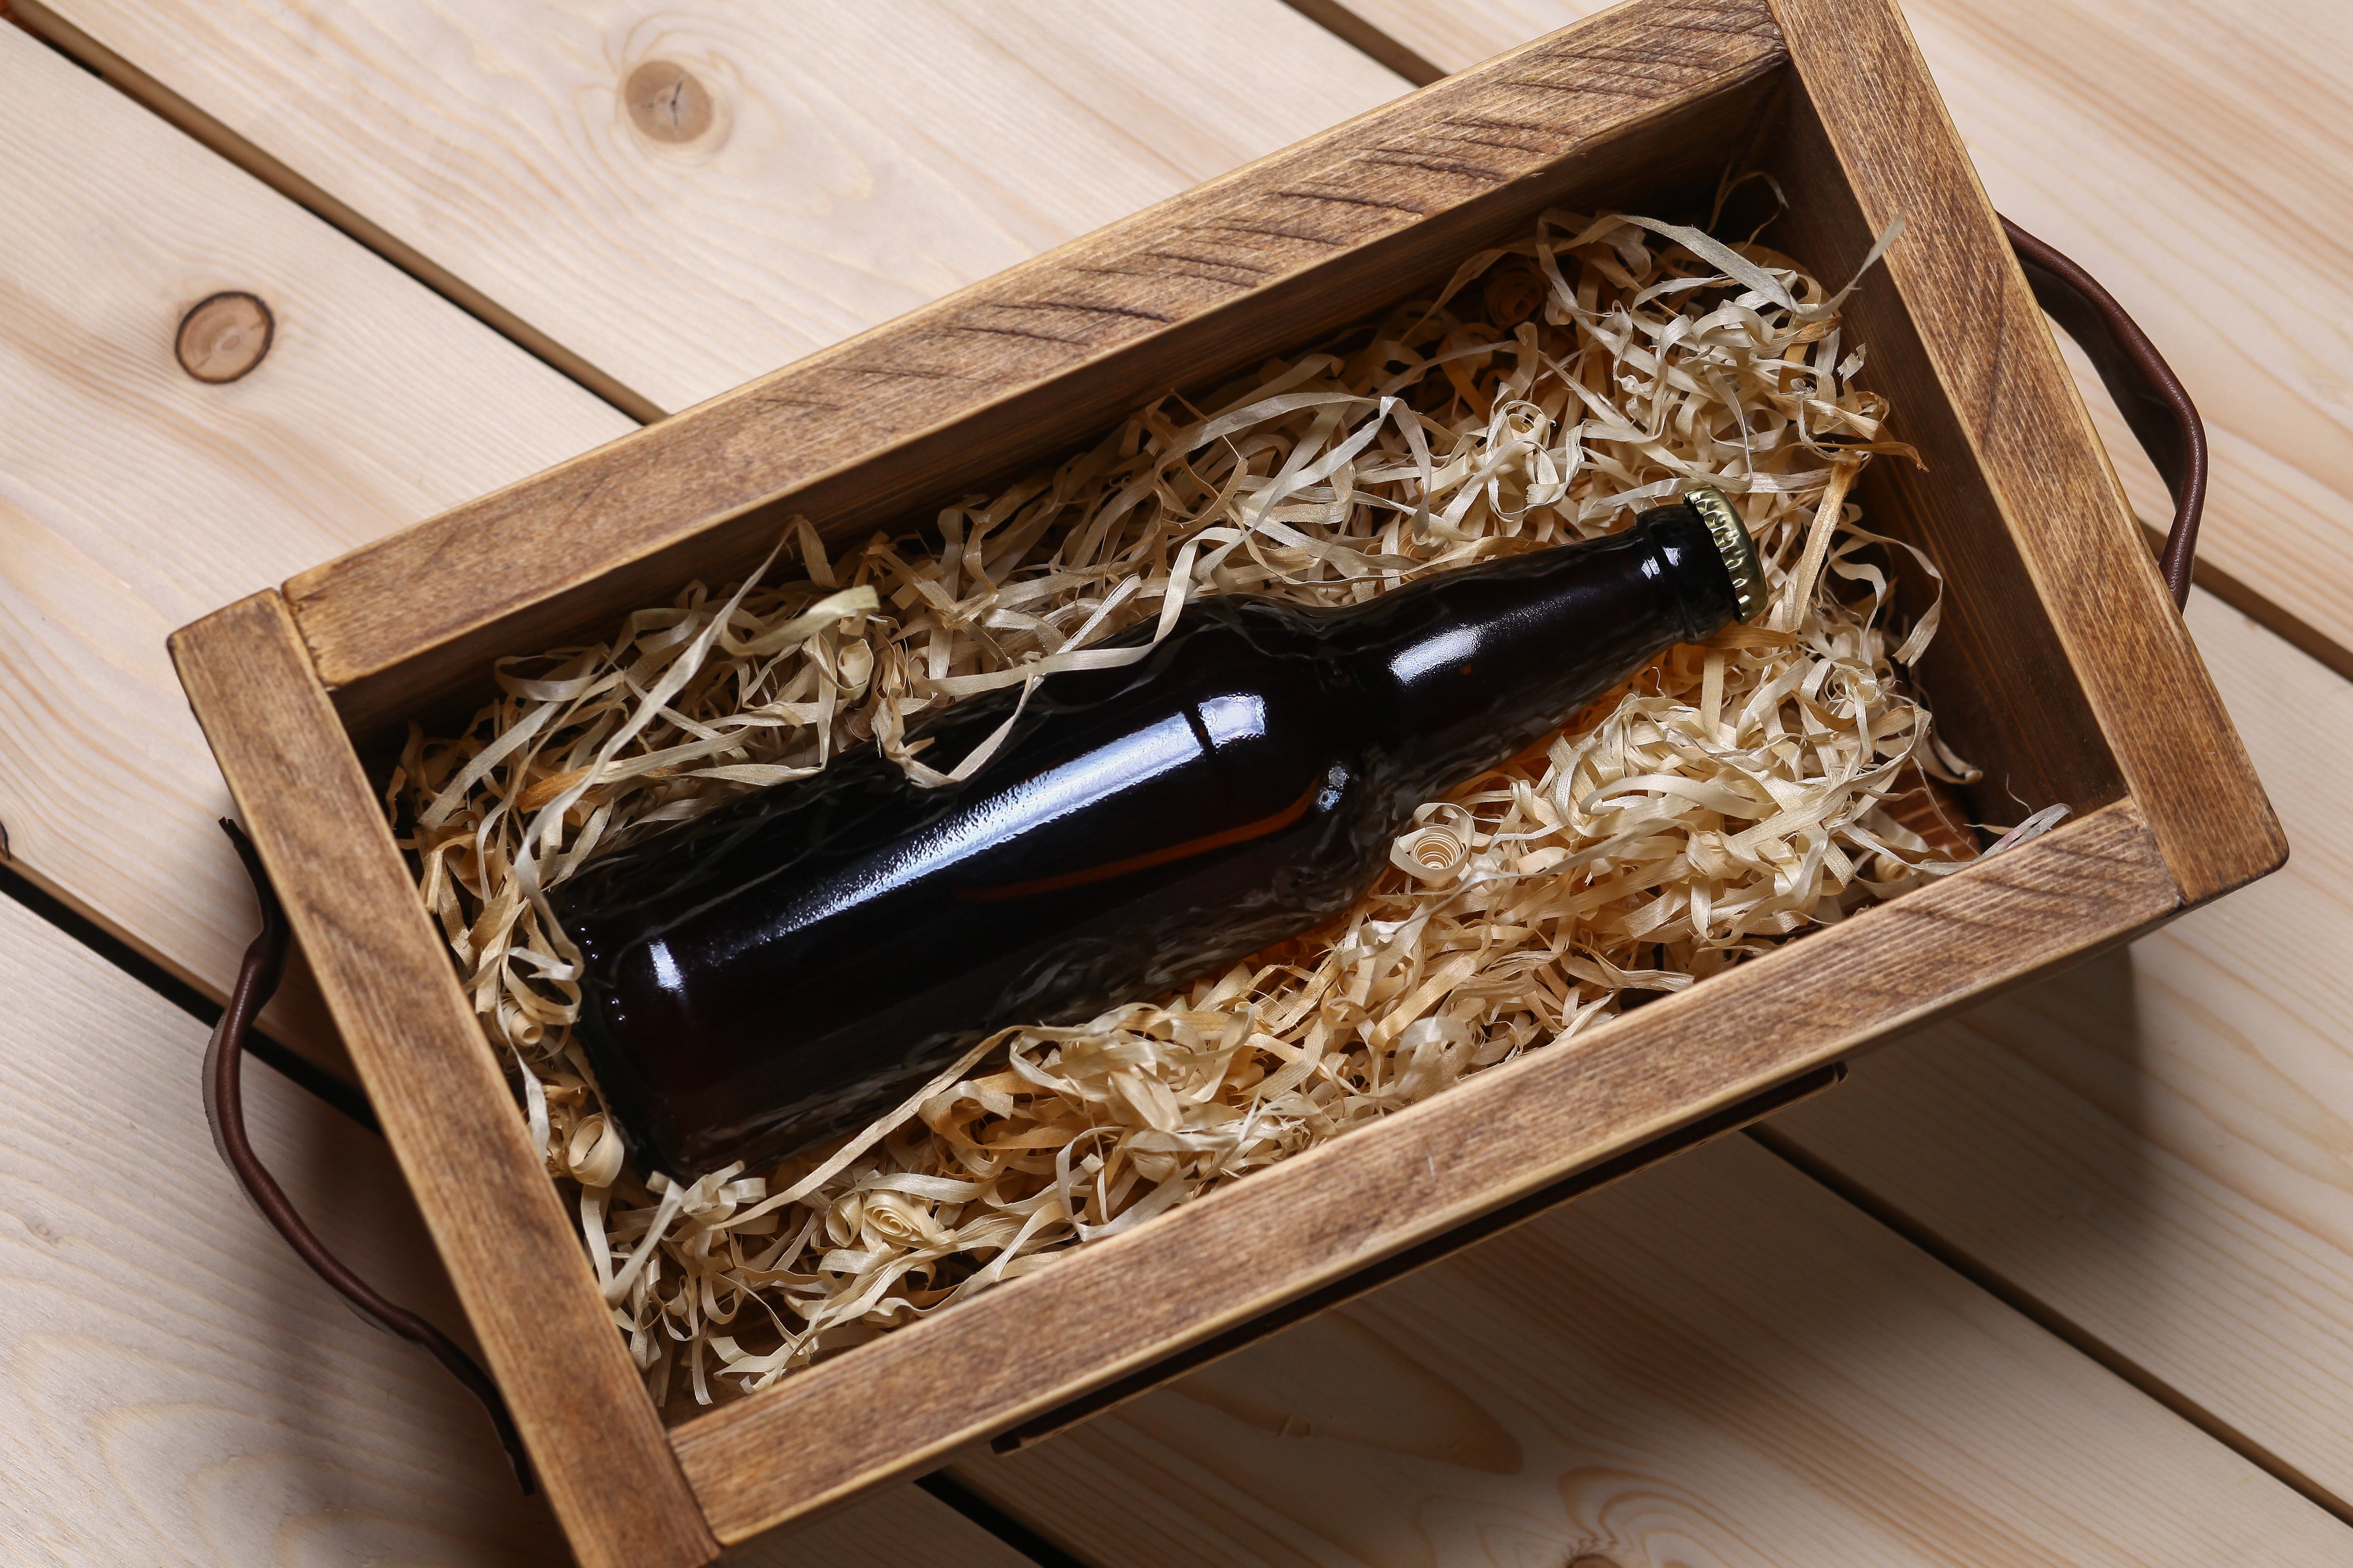 Top 13 Gifts for Craft Beer Lovers